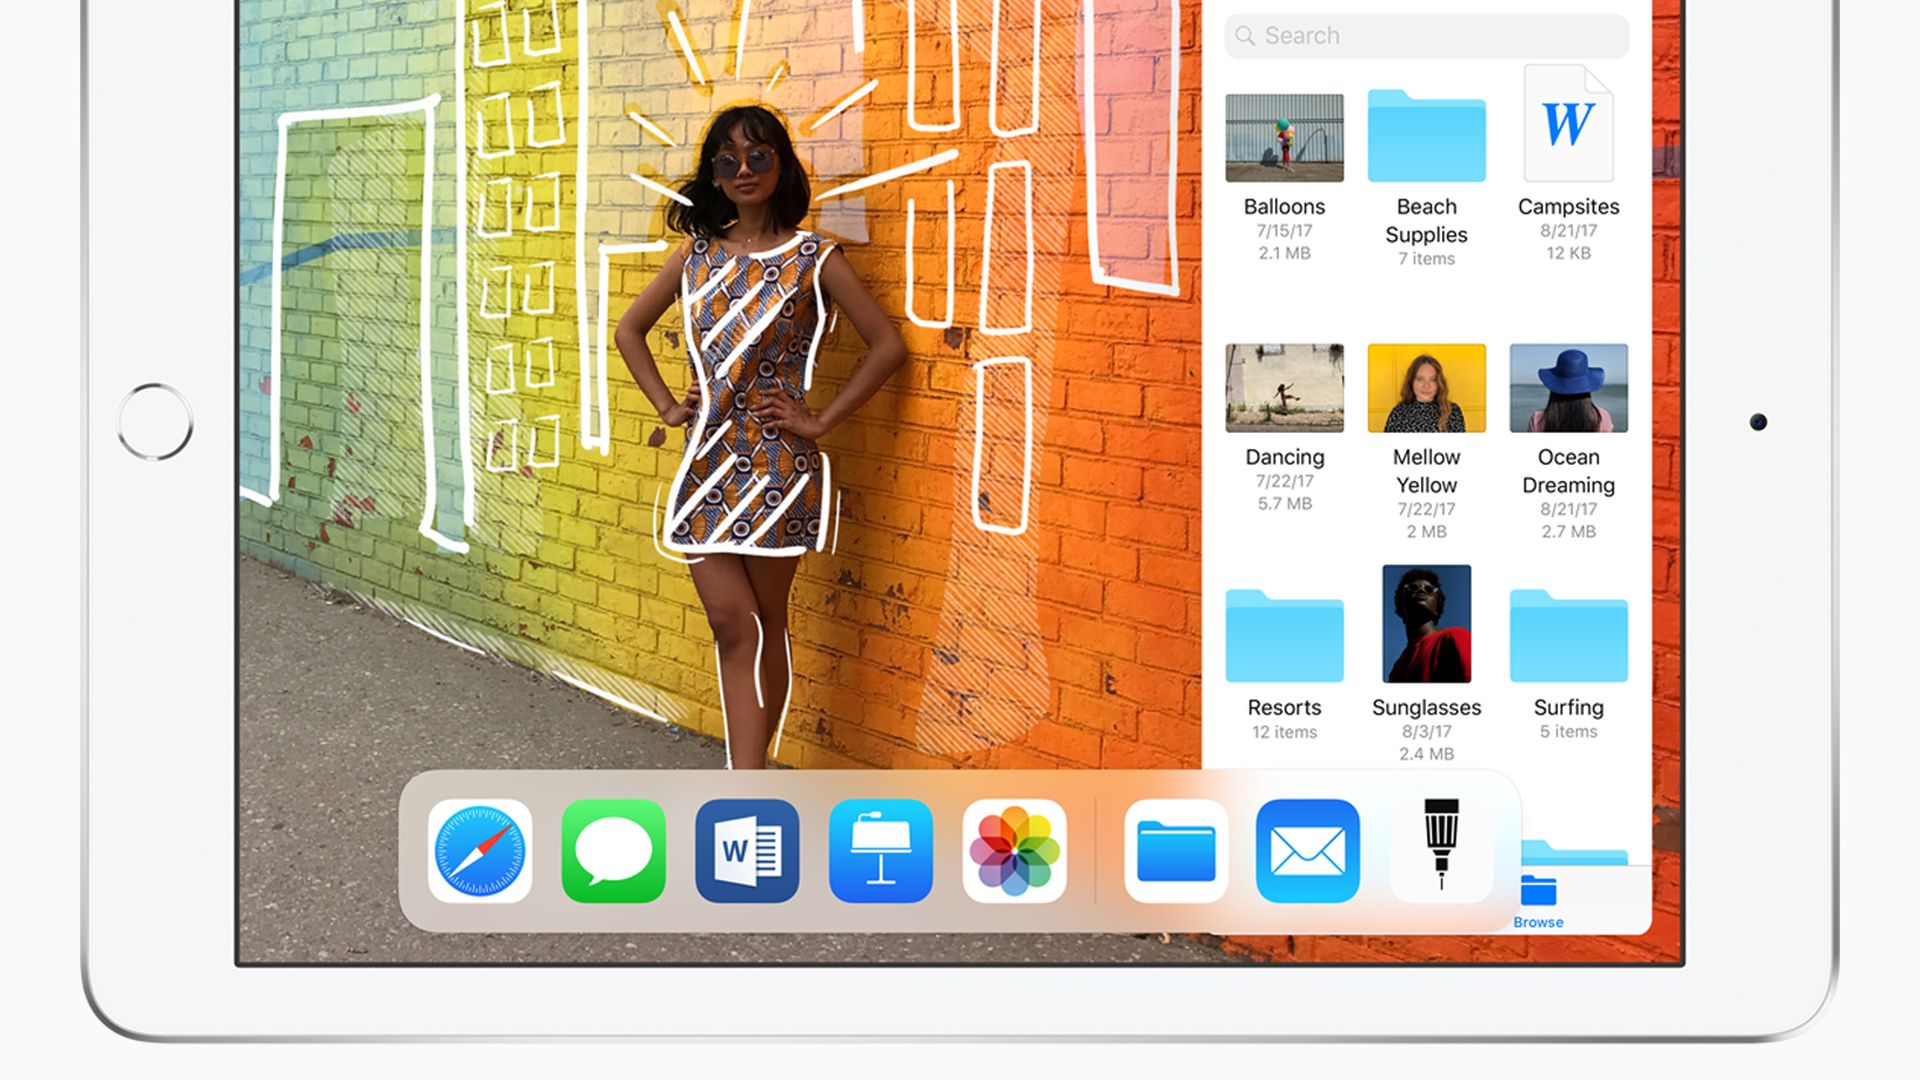 The new low-end iPad features Apple Pencil support